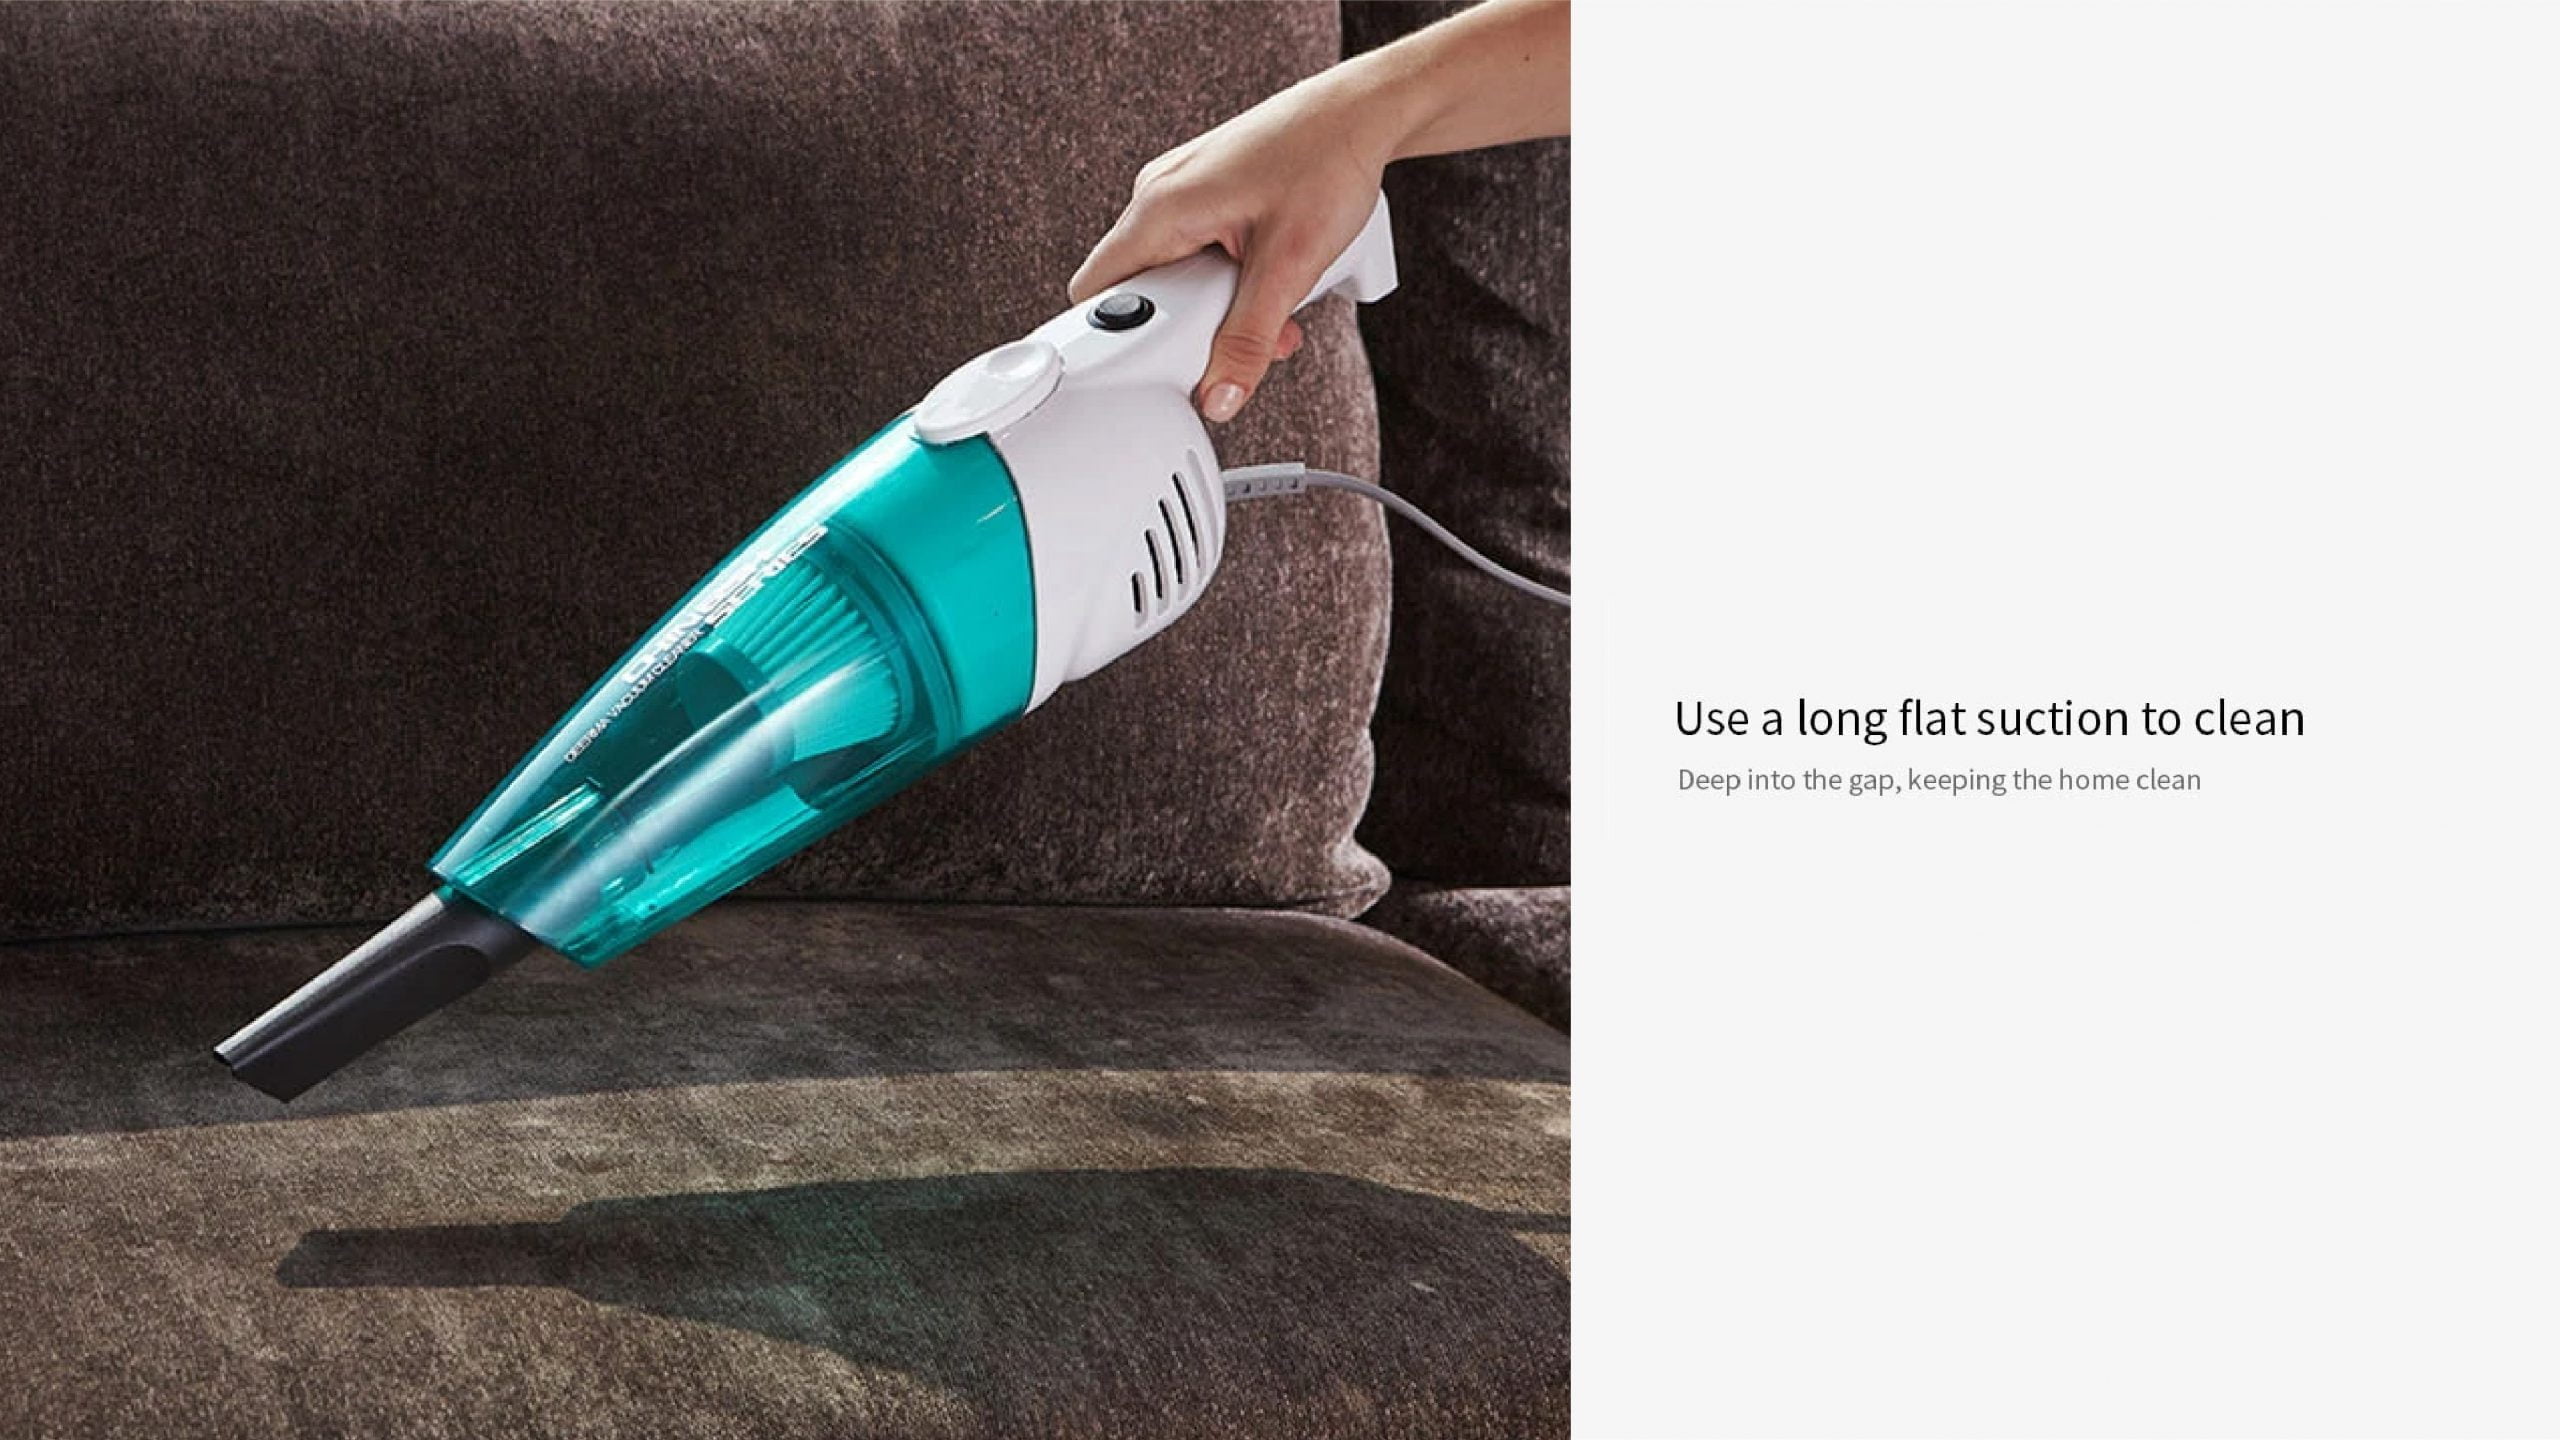 Vacuum 333 07 Scaled Xiaomi Deerma Dx118C Upright Vacuum Cleaner Mini 2-In-1 Pushrod Handheld Cleaner With 16000Pa Super Suction- Green Https://Www.youtube.com/Watch?V=A4_Ujrhyw_I Deerma Dx118C Vacuum Cleaner Deerma Dx118C Vacuum Cleaner 2-In-1 Pushrod Handheld Cleaner With 16000Pa Super Suction